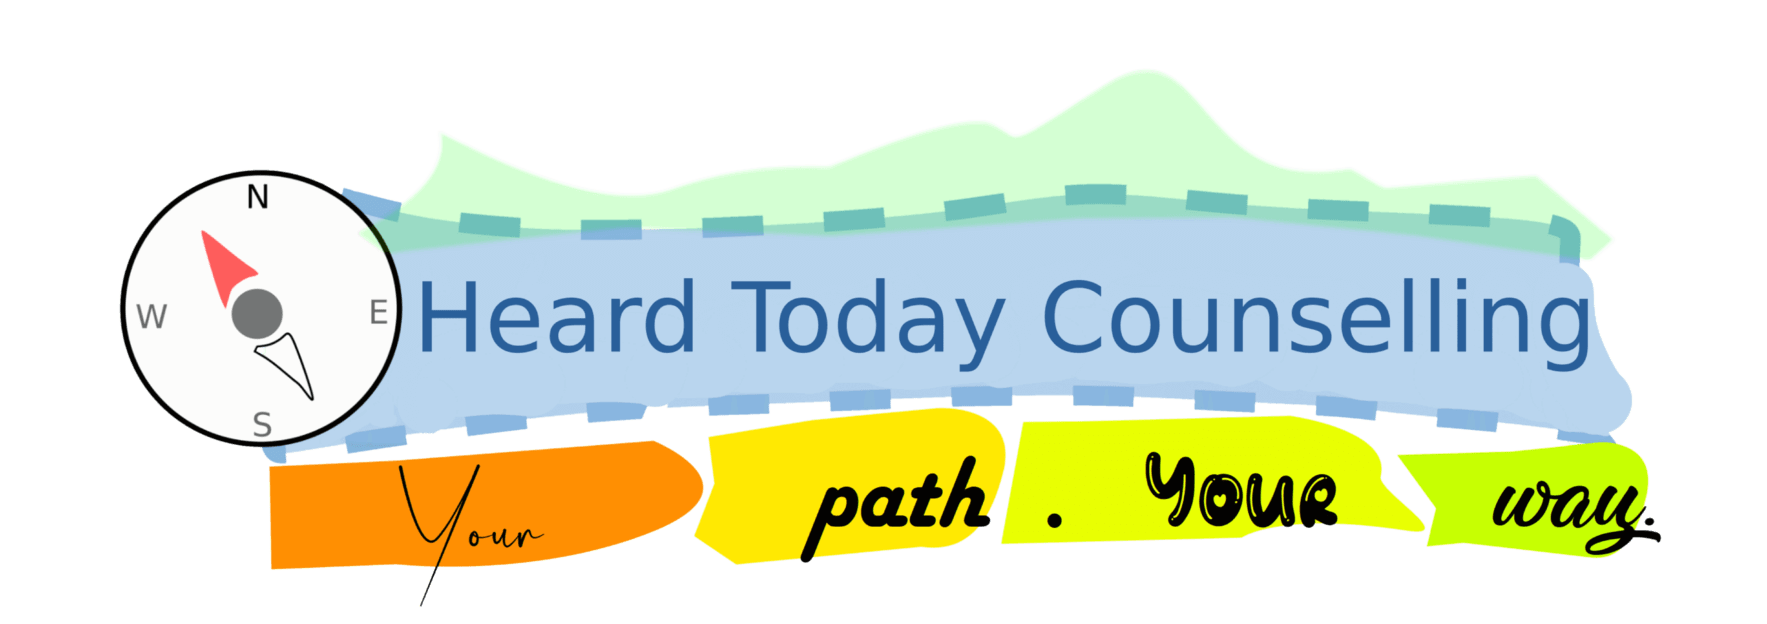 Heard Today Counselling- Logo , stylised green mountains at the top of the page, blue background (water) in the middle with the text 'Heard Today Counselling' below the water are 4 brightly coloured stepping stones/ dry stone wall pieces moving left to right- in orange, yellow, lime green, and bright green, on the stones there is text that says 'your path. your way.' on the left hand side of the logo is a magnetic compass.